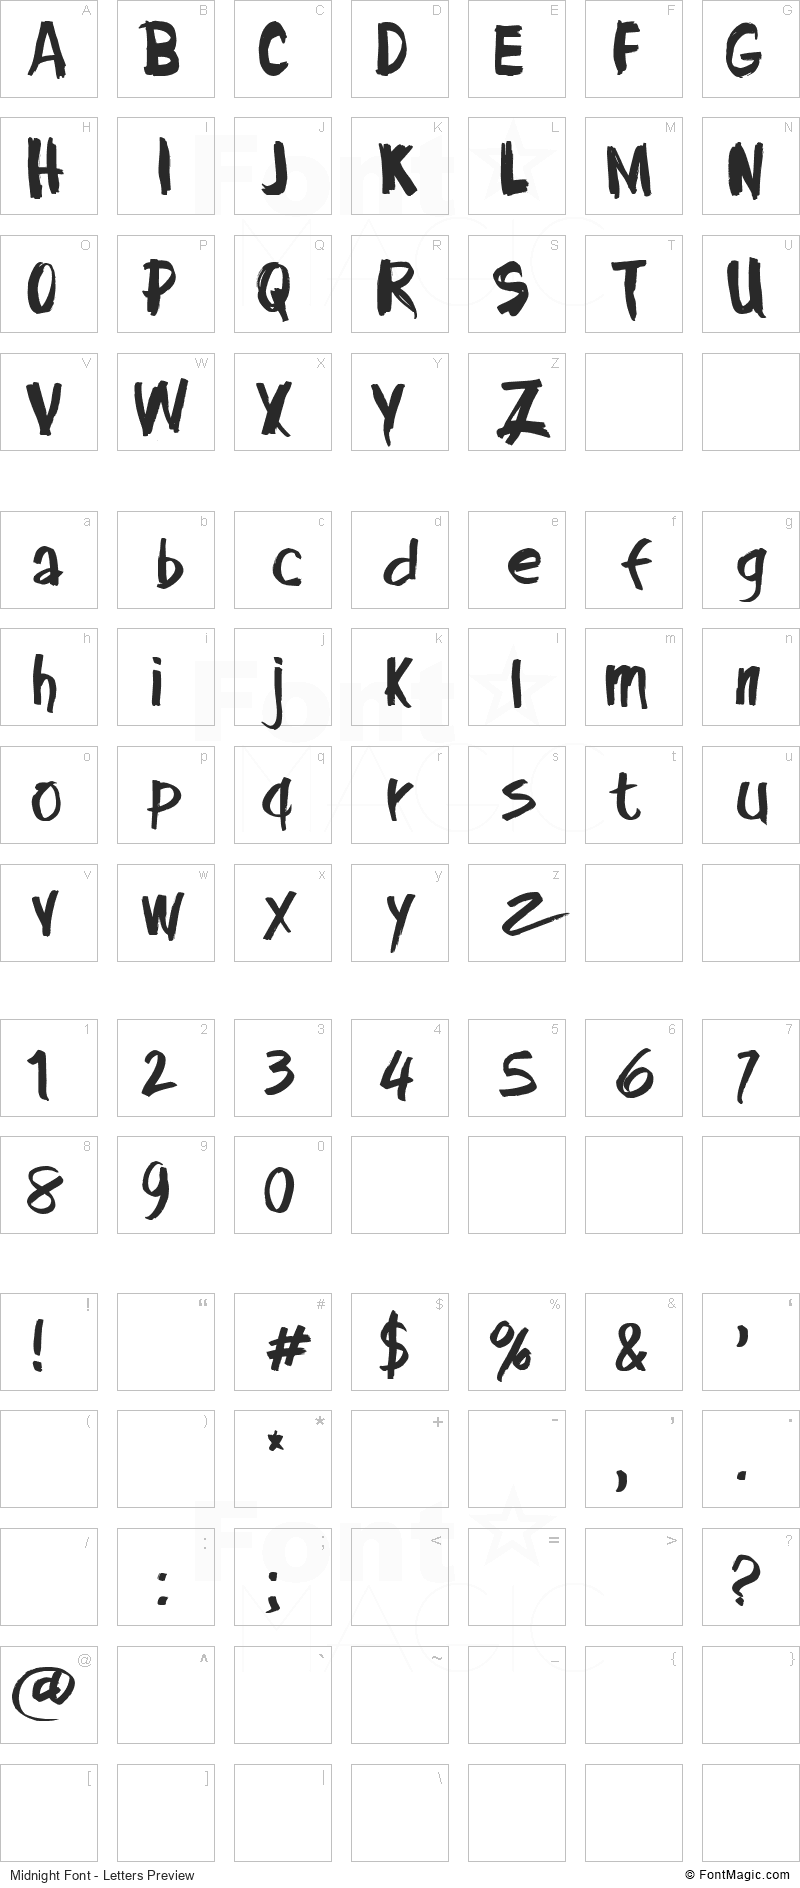 Midnight Font - All Latters Preview Chart